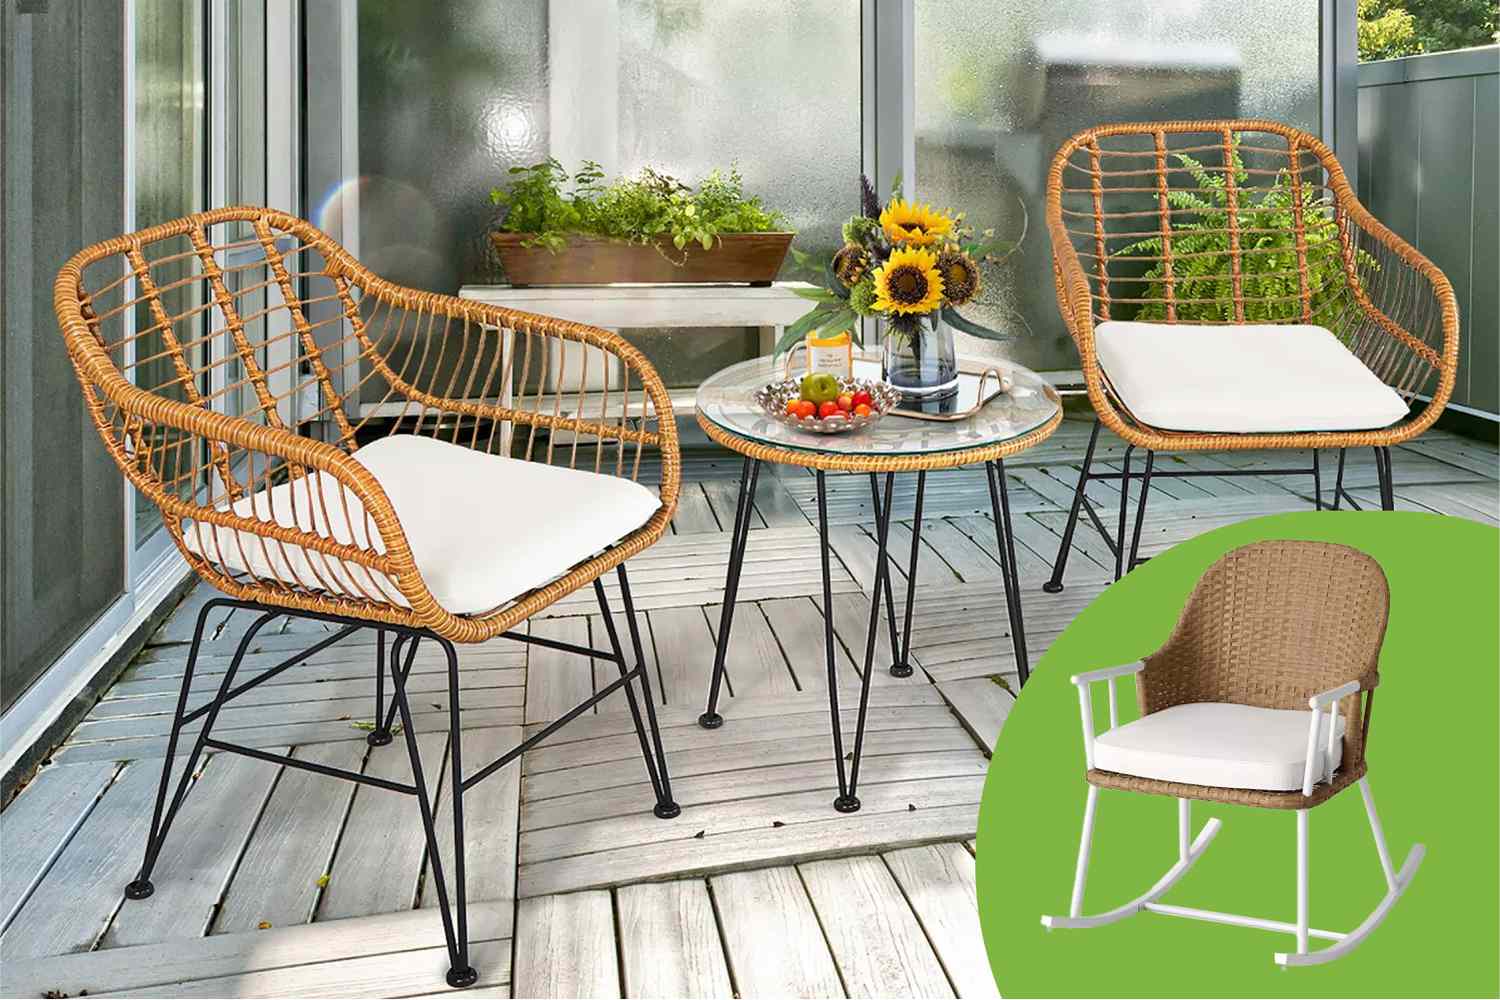 Target’s Memorial Day Sale Has Dropped — Outdoor Decor from Joanna Gaines and Studio McGee Starts at Just $11